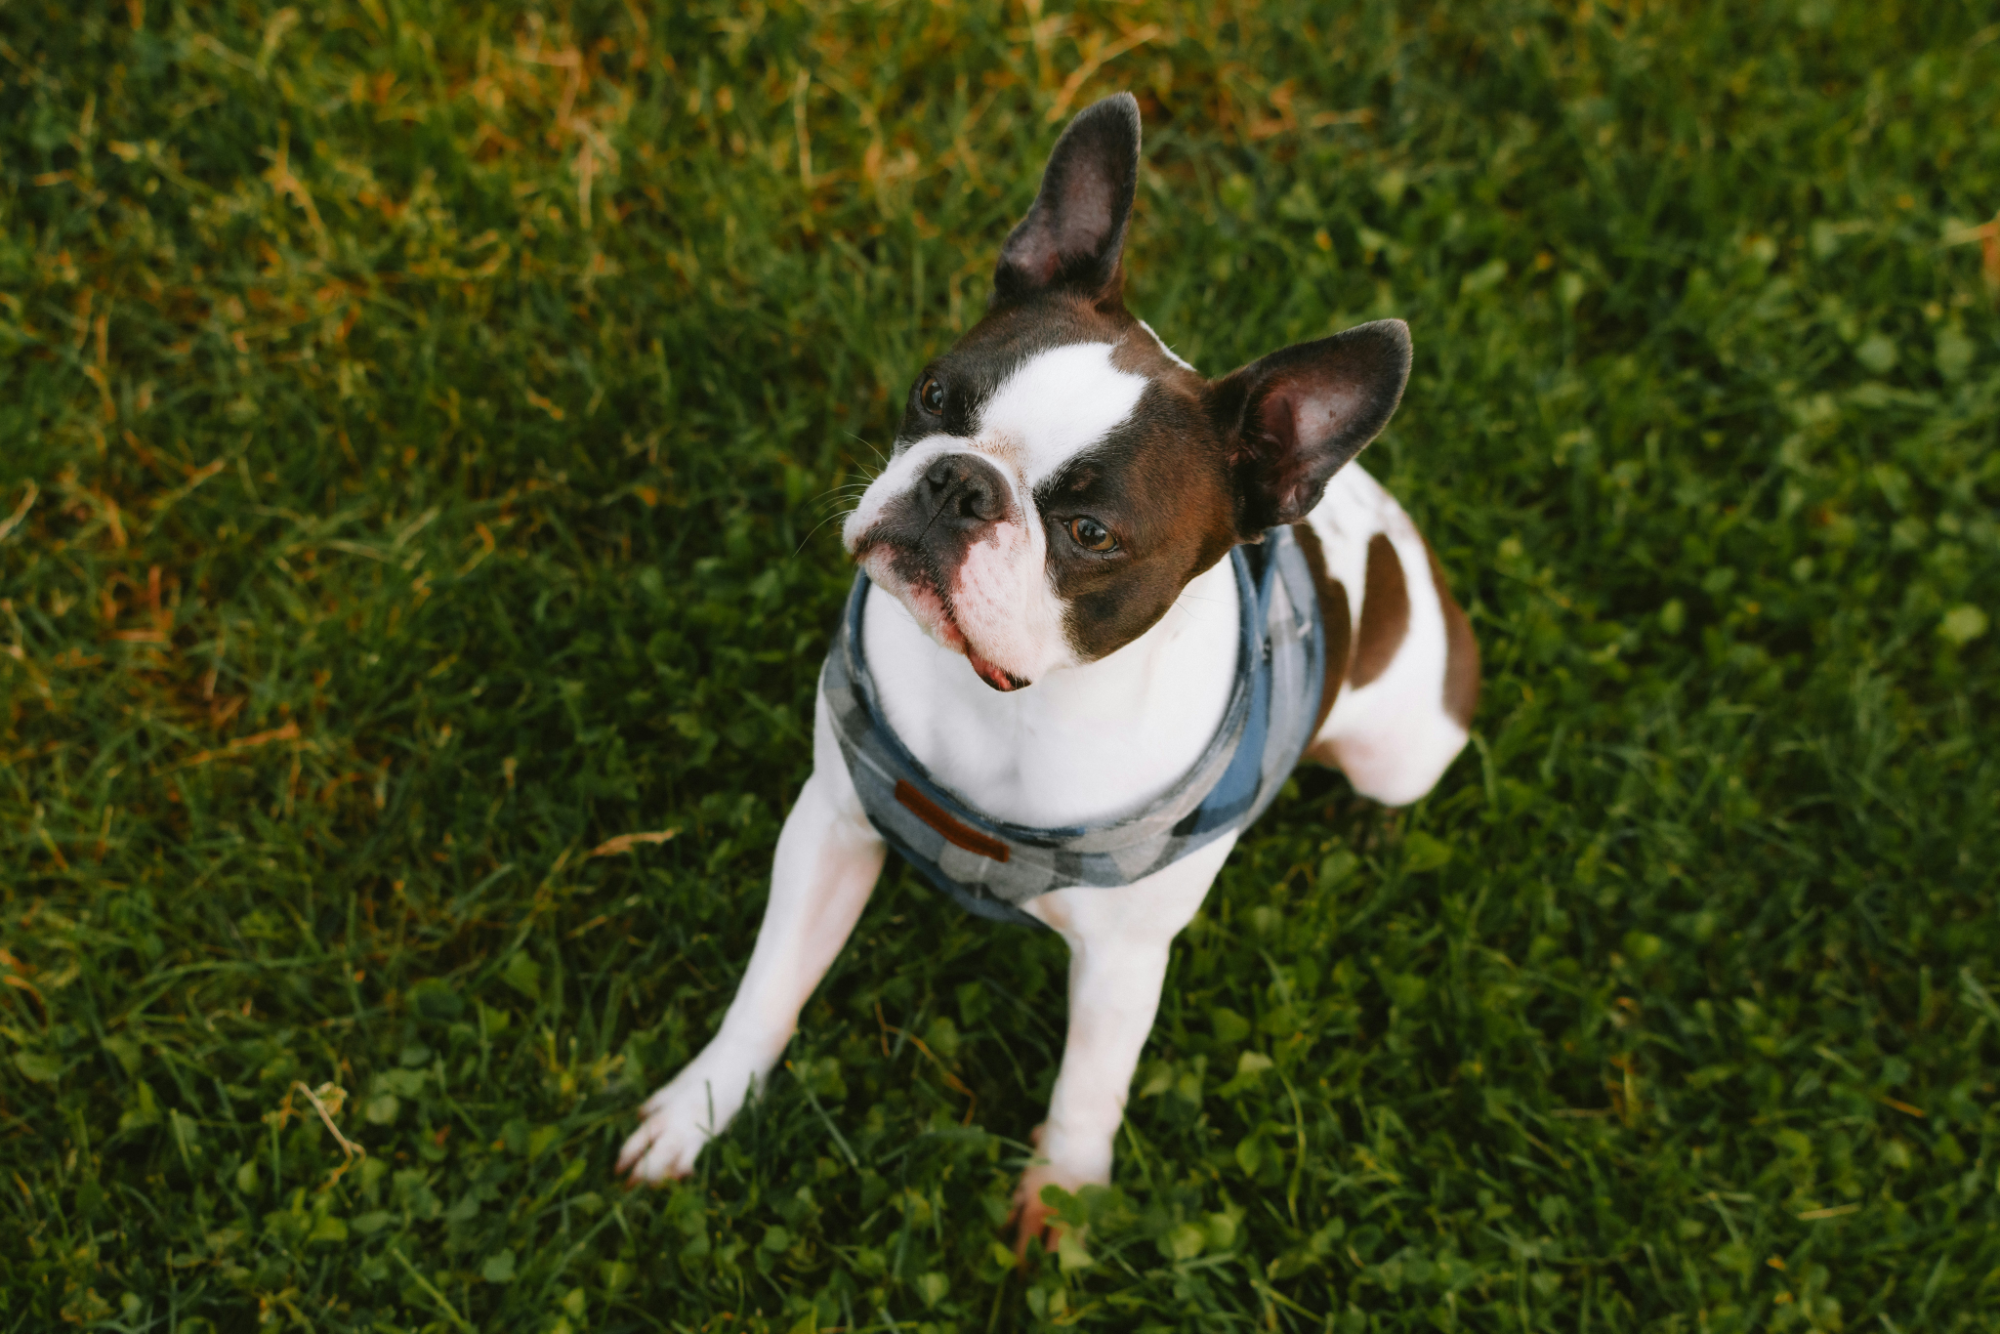 100 Unique and Rare Name Suggestions for a Female Boston Terrier